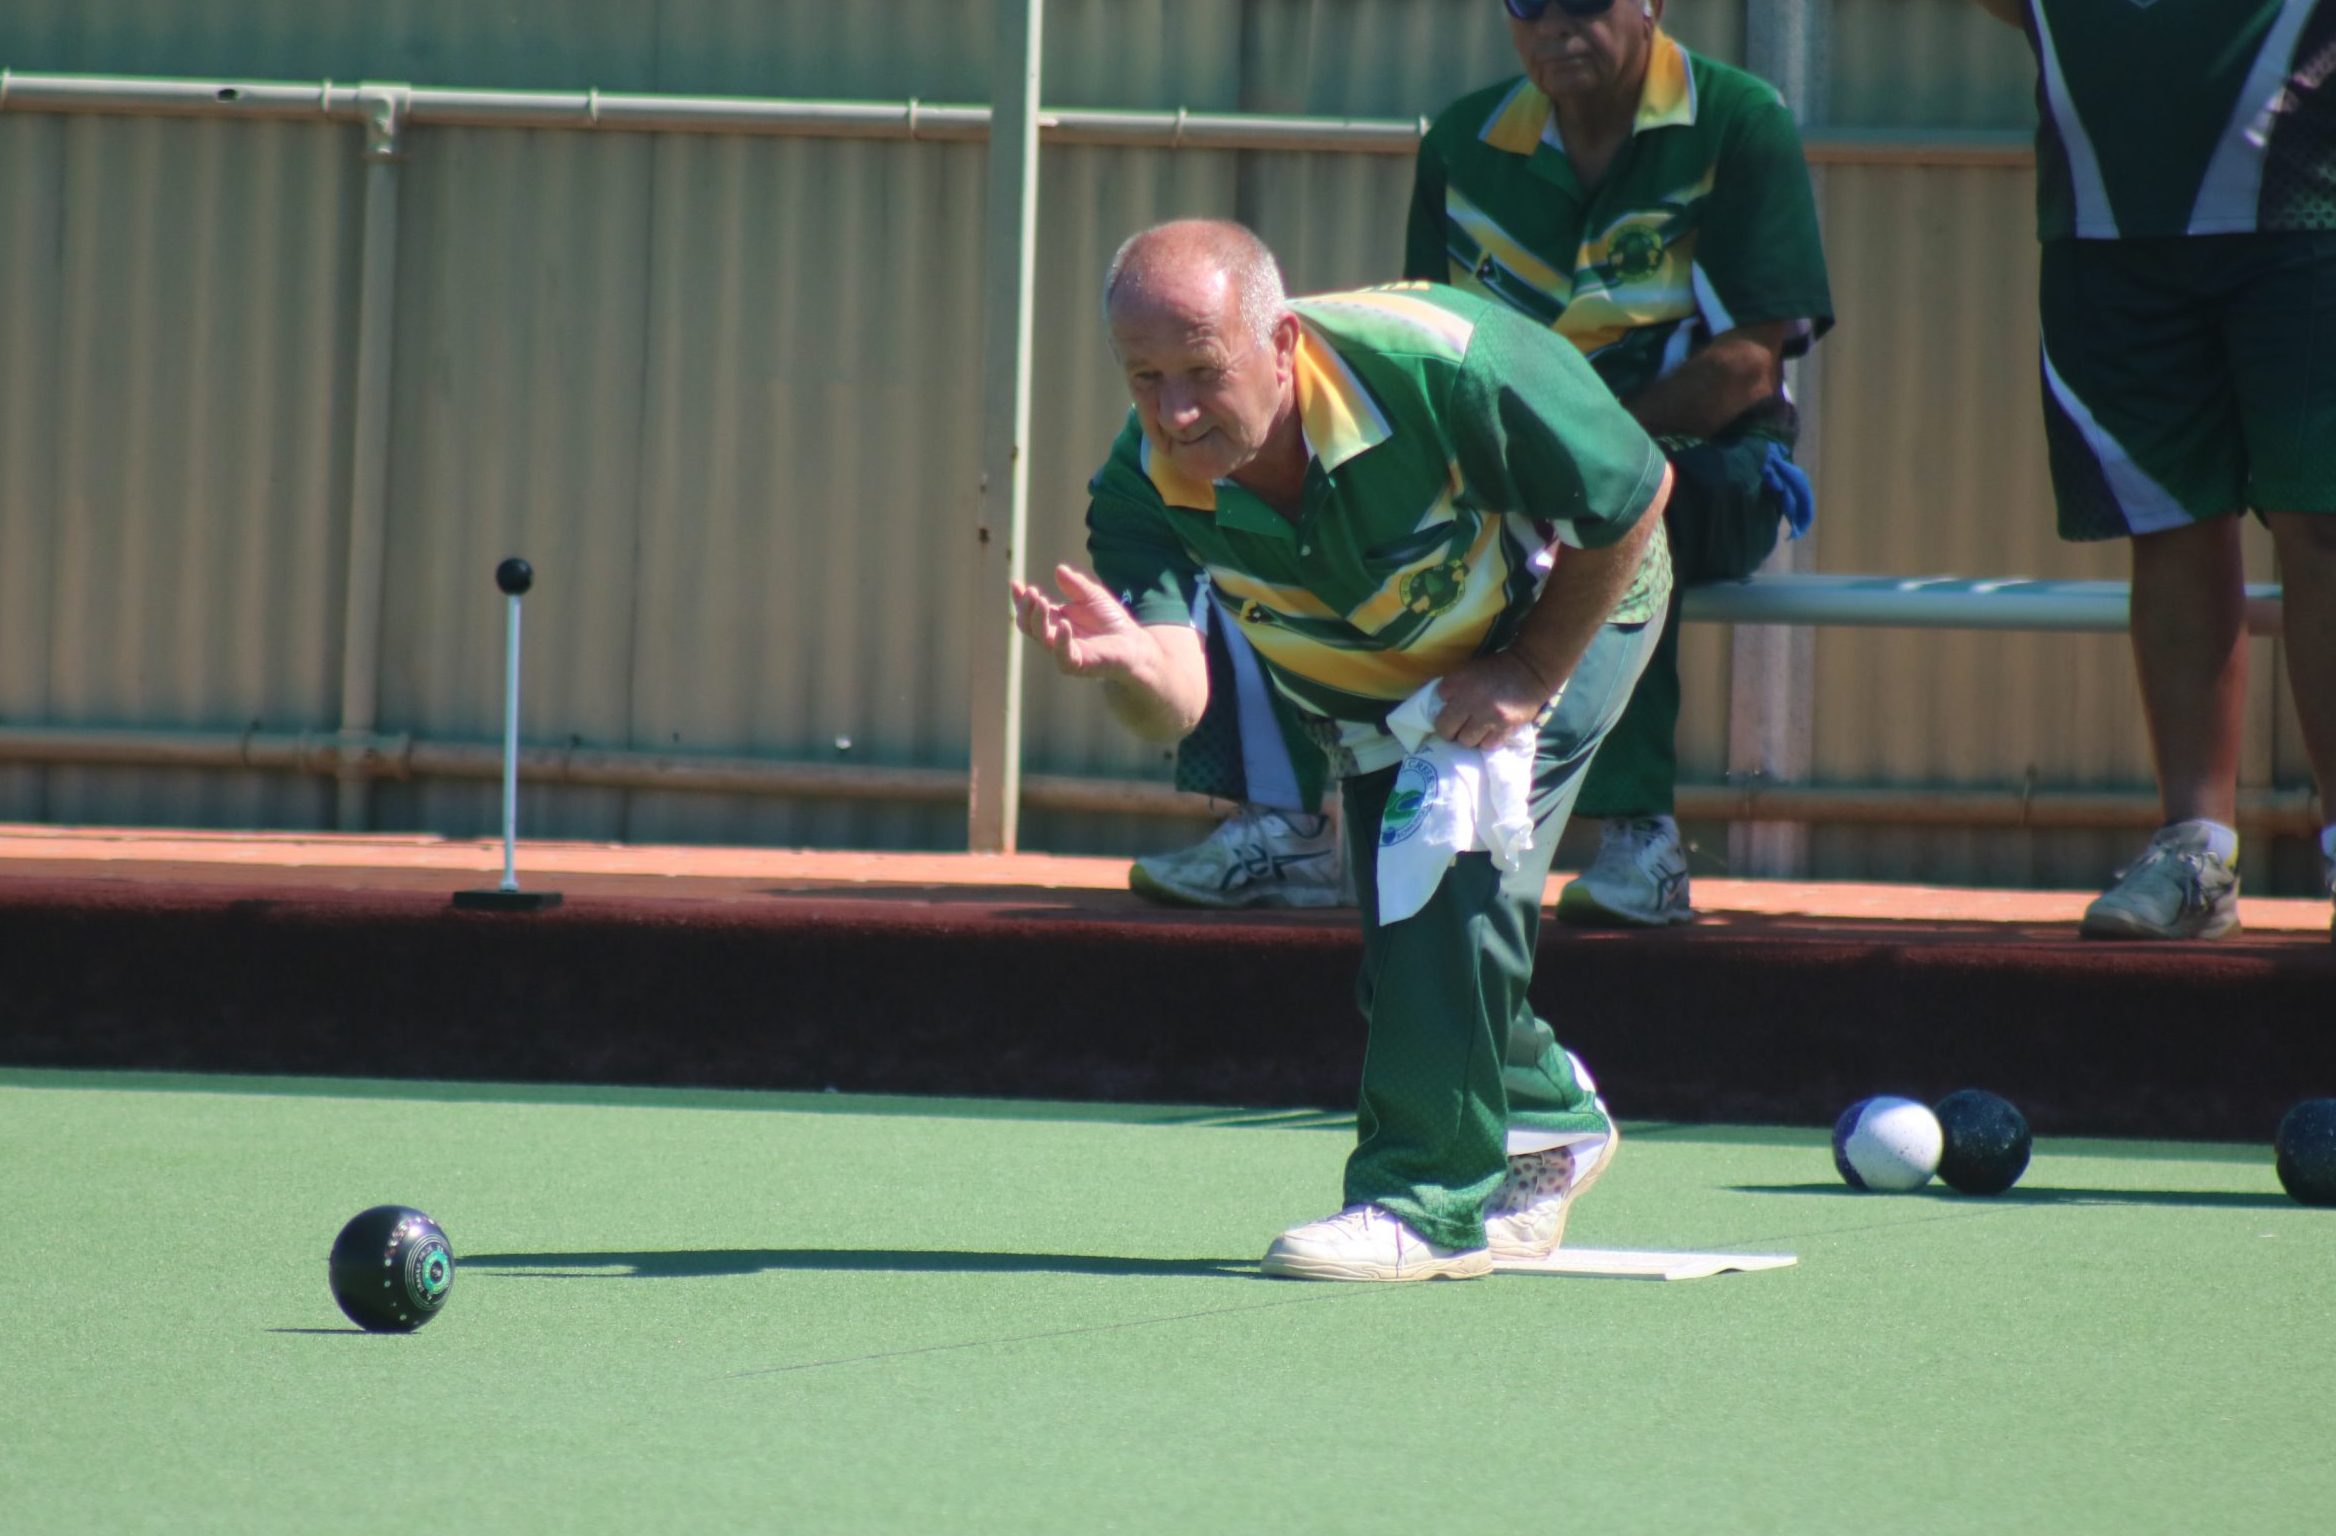 Bowls is back at Wee Waa: Club Championships matches to be played this weekend